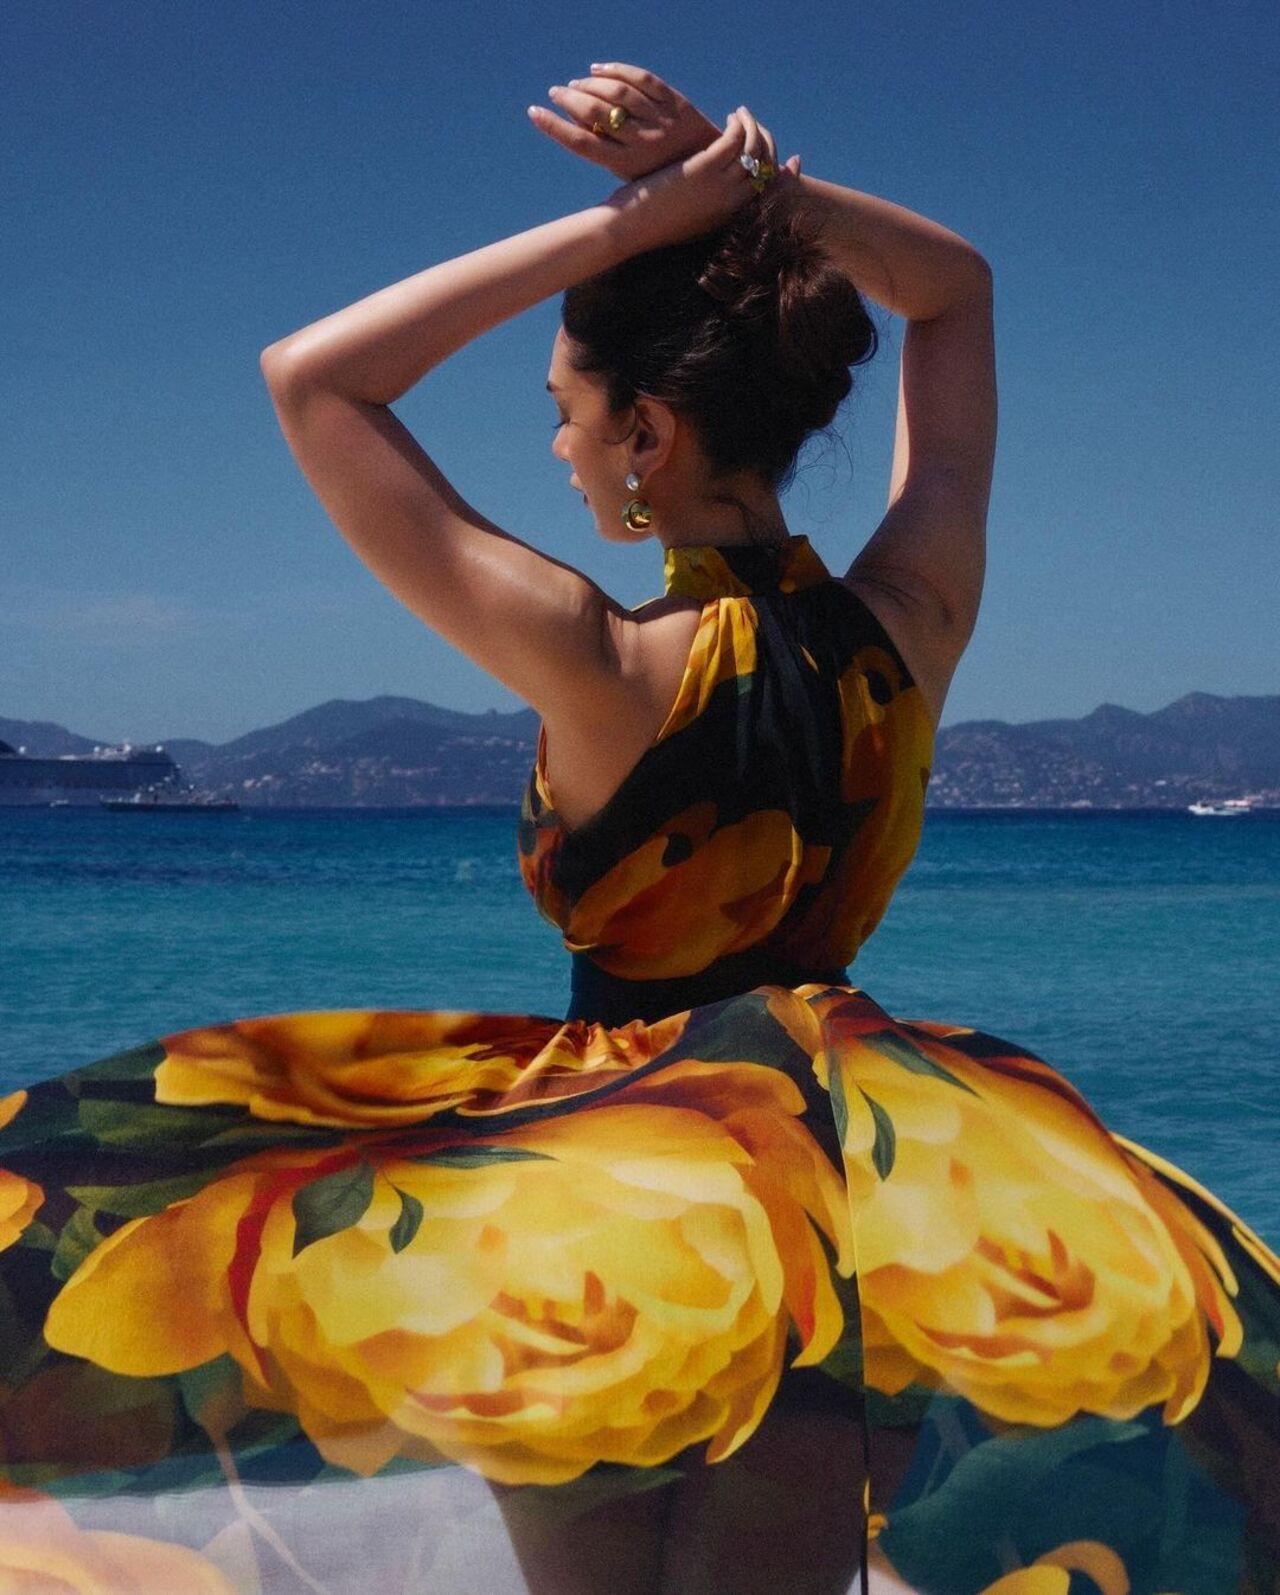 Aditi Rao Hydari took to her Instagram and shared pics posing near the sea in a floral dress picked from the shelves of the clothing brand Gauri & Nainika. The actress gave princess vibes in the yellow and black short dress